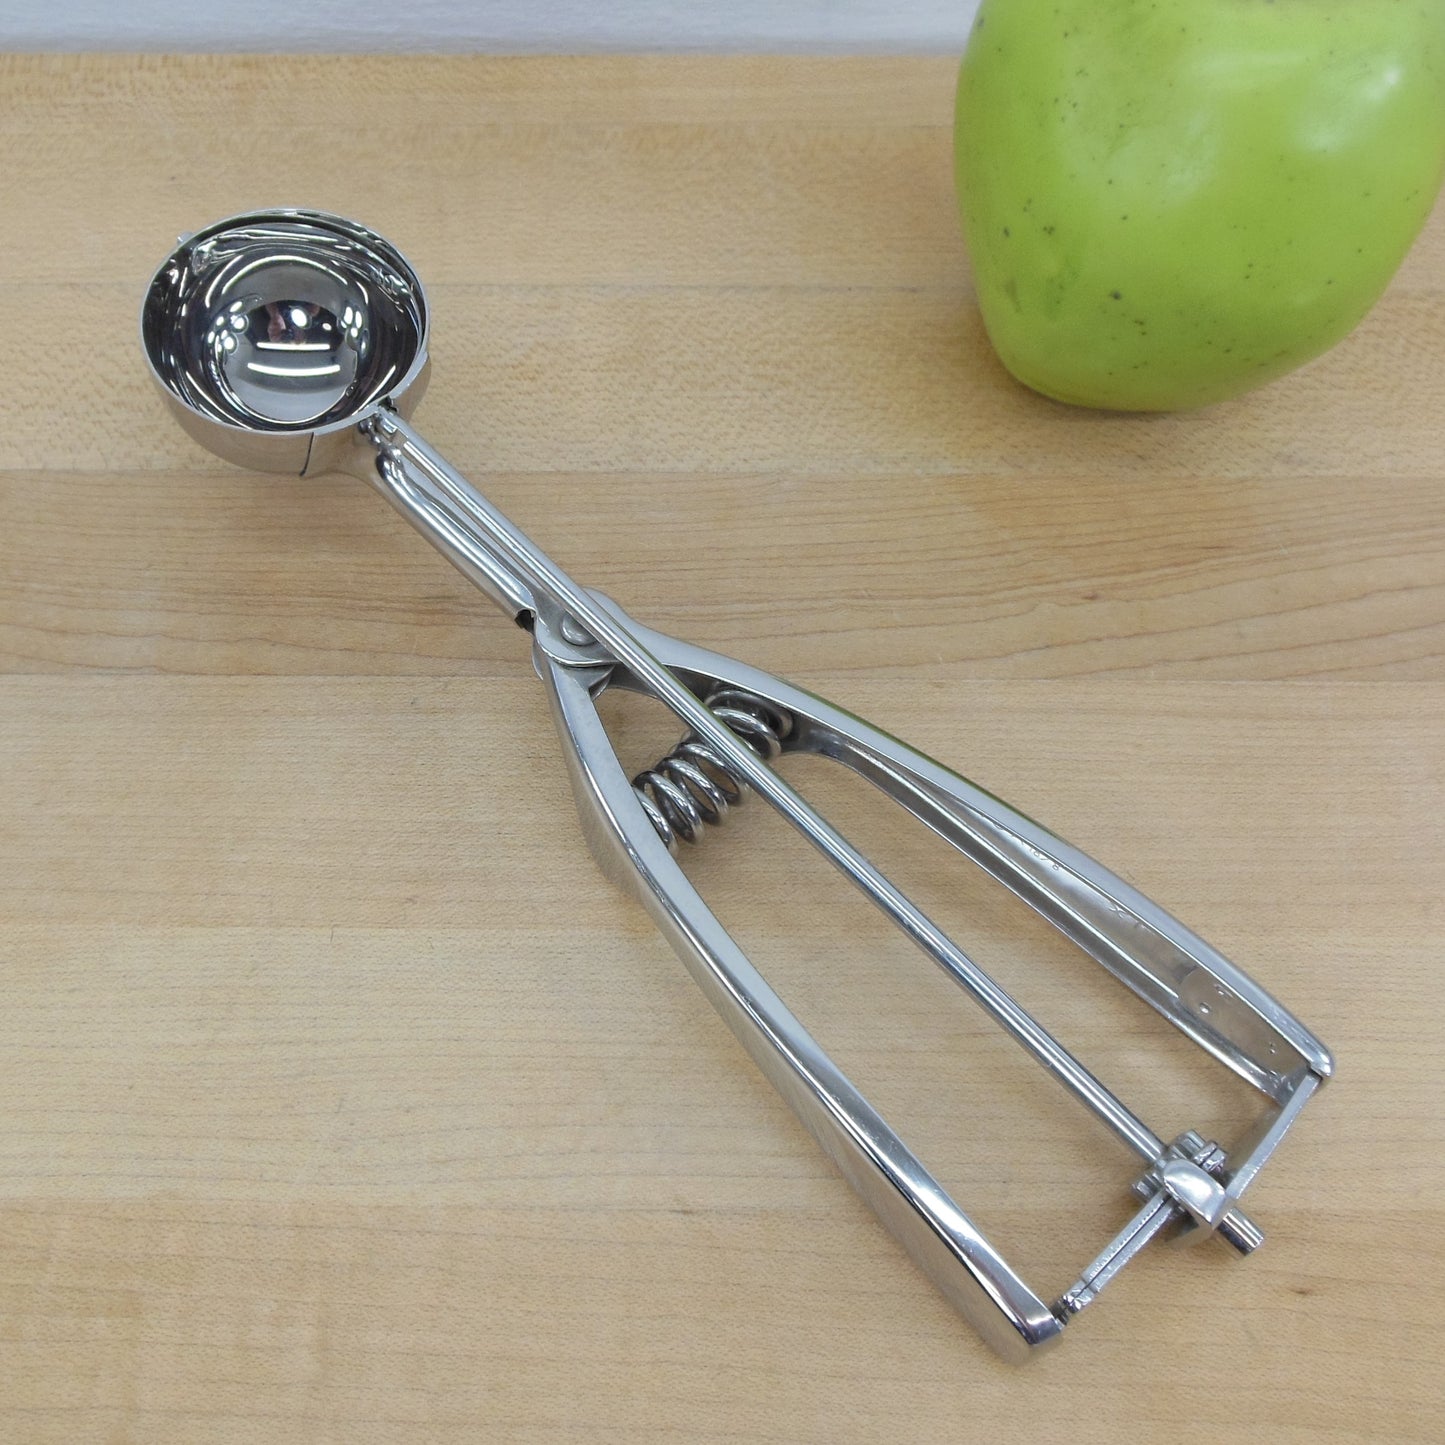 2 - VINTAGE PAMPERED CHEF STAINLESS STEEL SCOOP/MELON BALLERS